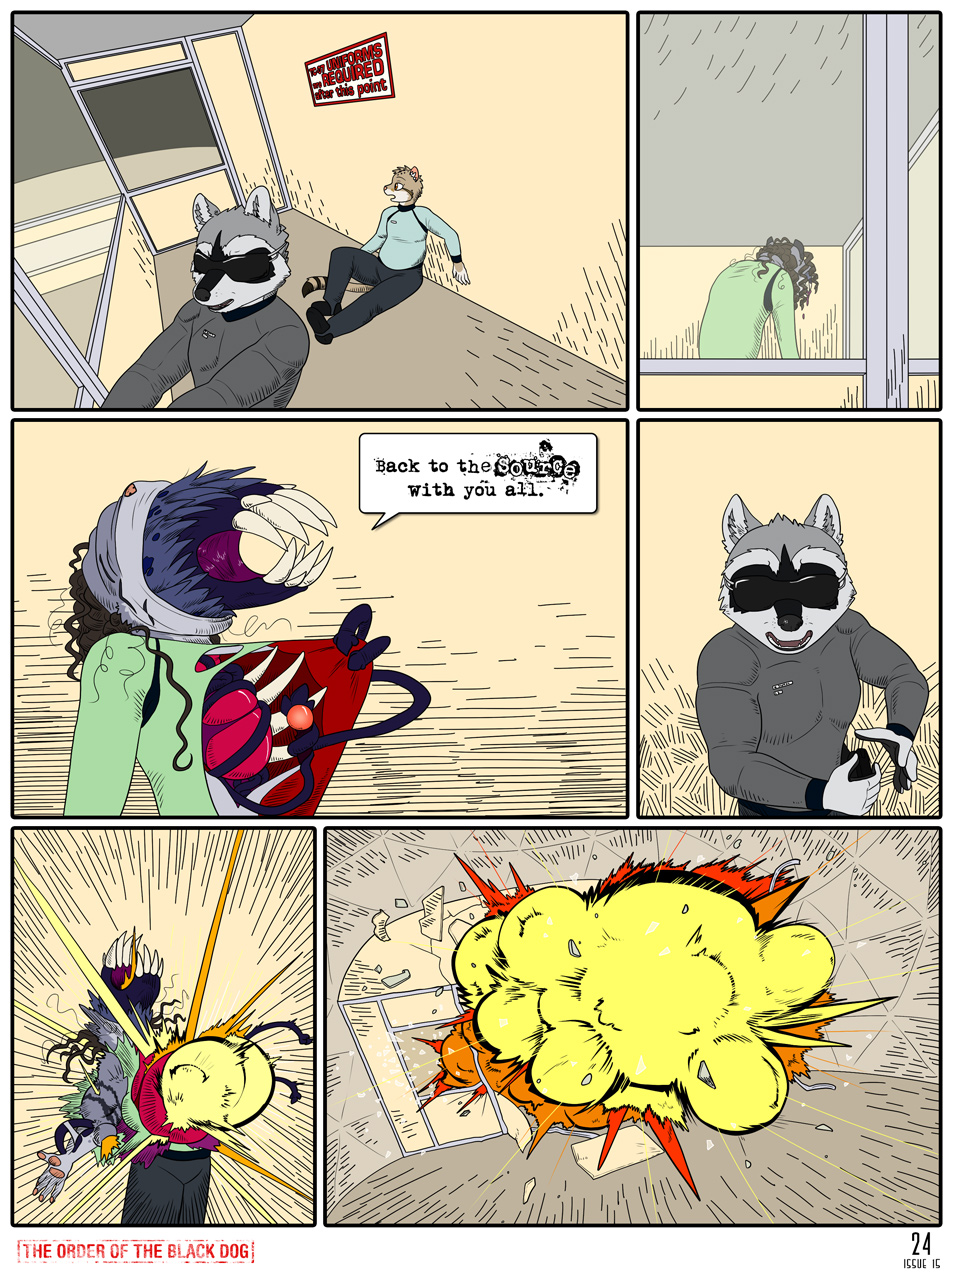 Issue 15, Page 24